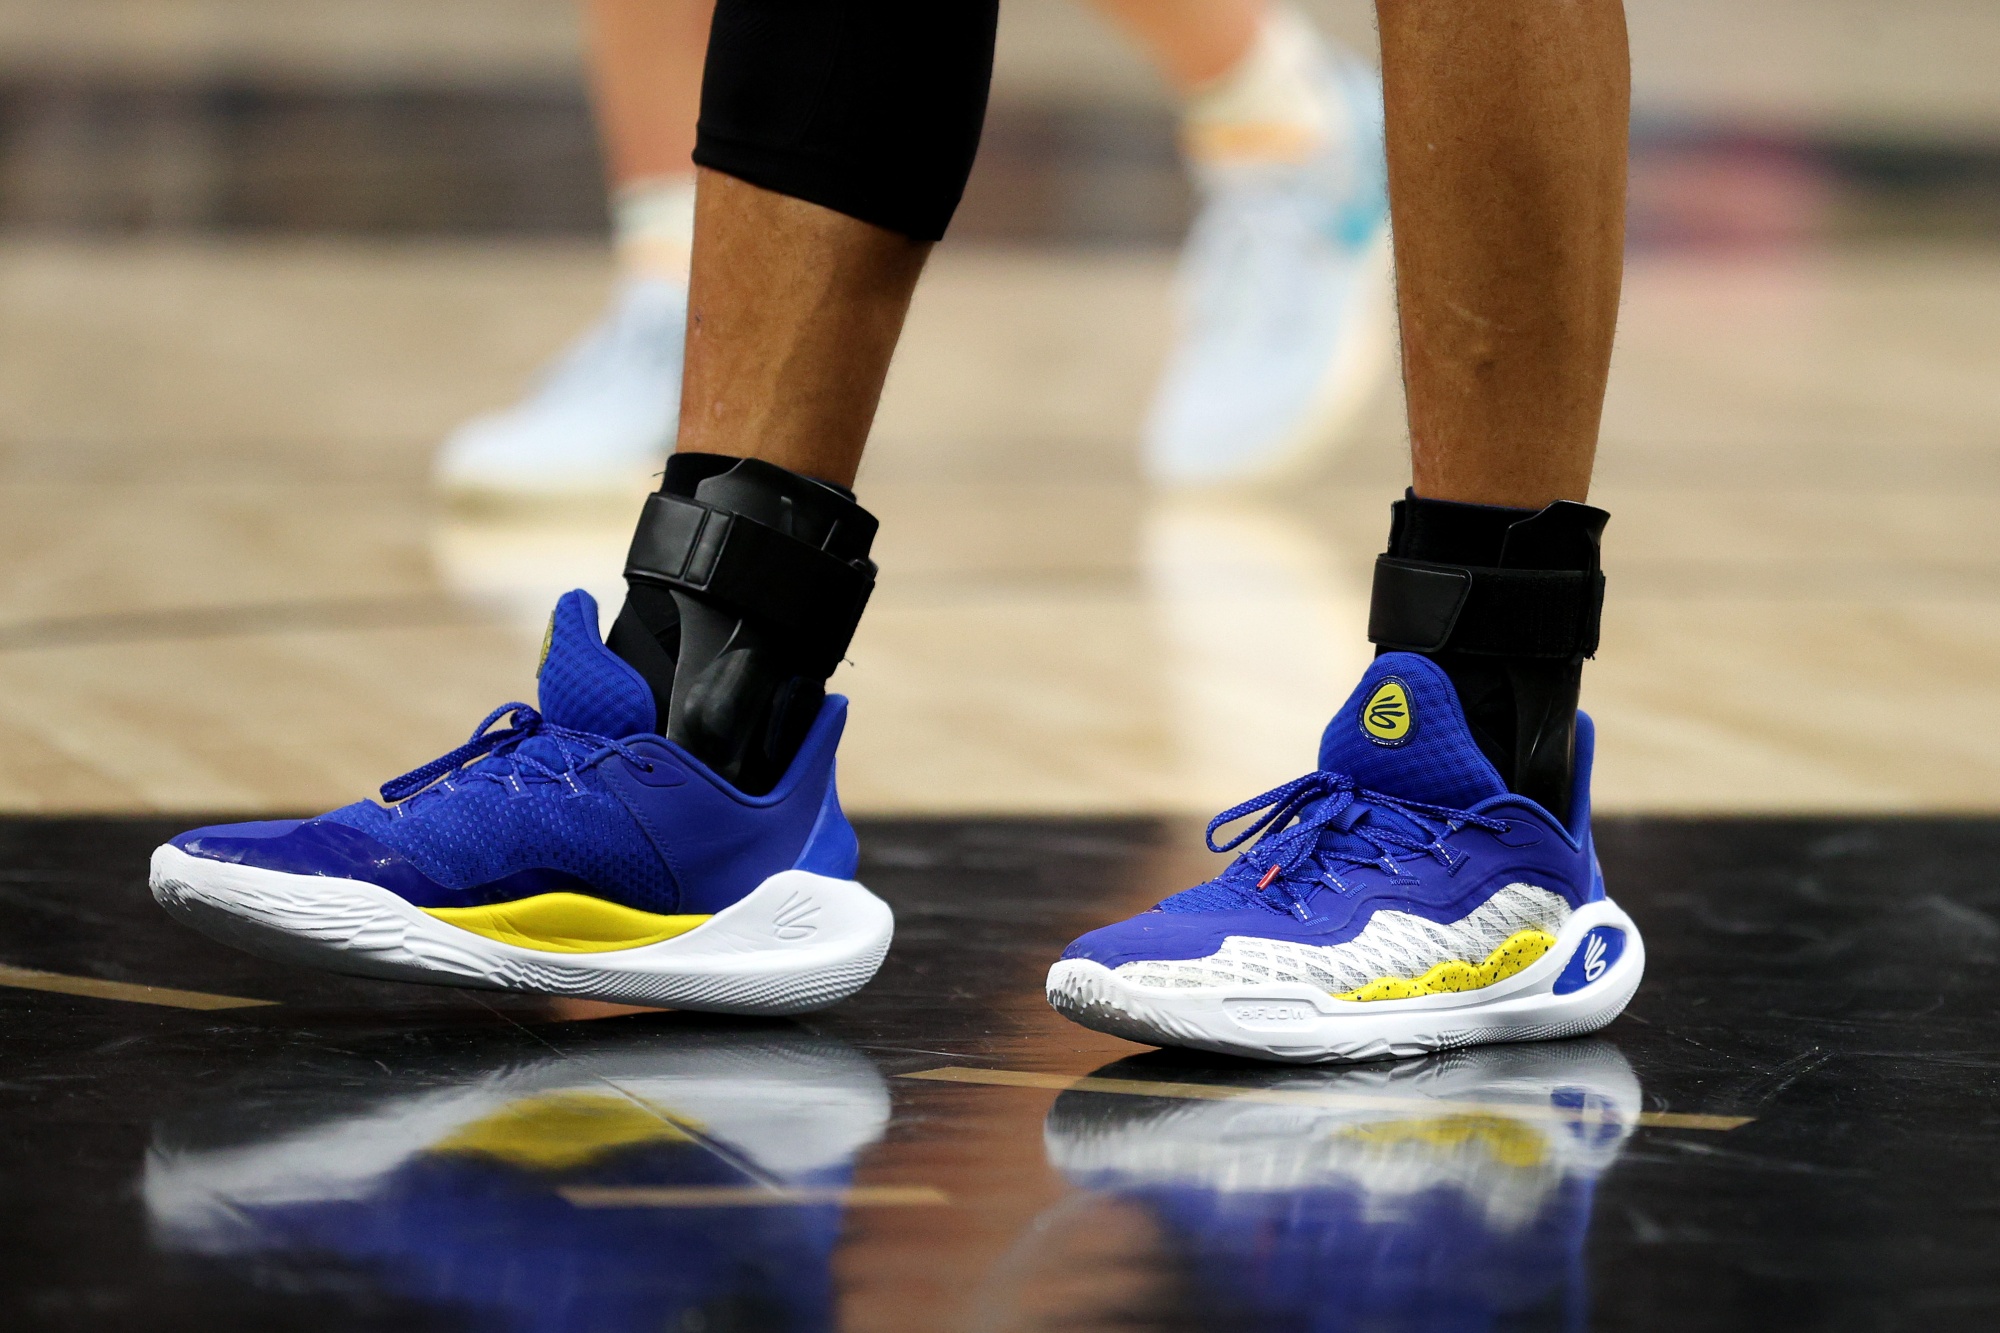 These 5 Simple Photos Show Why Sales of Under Armour's (UA) Stephen Curry  Basketball Sneakers Have Slowed - TheStreet